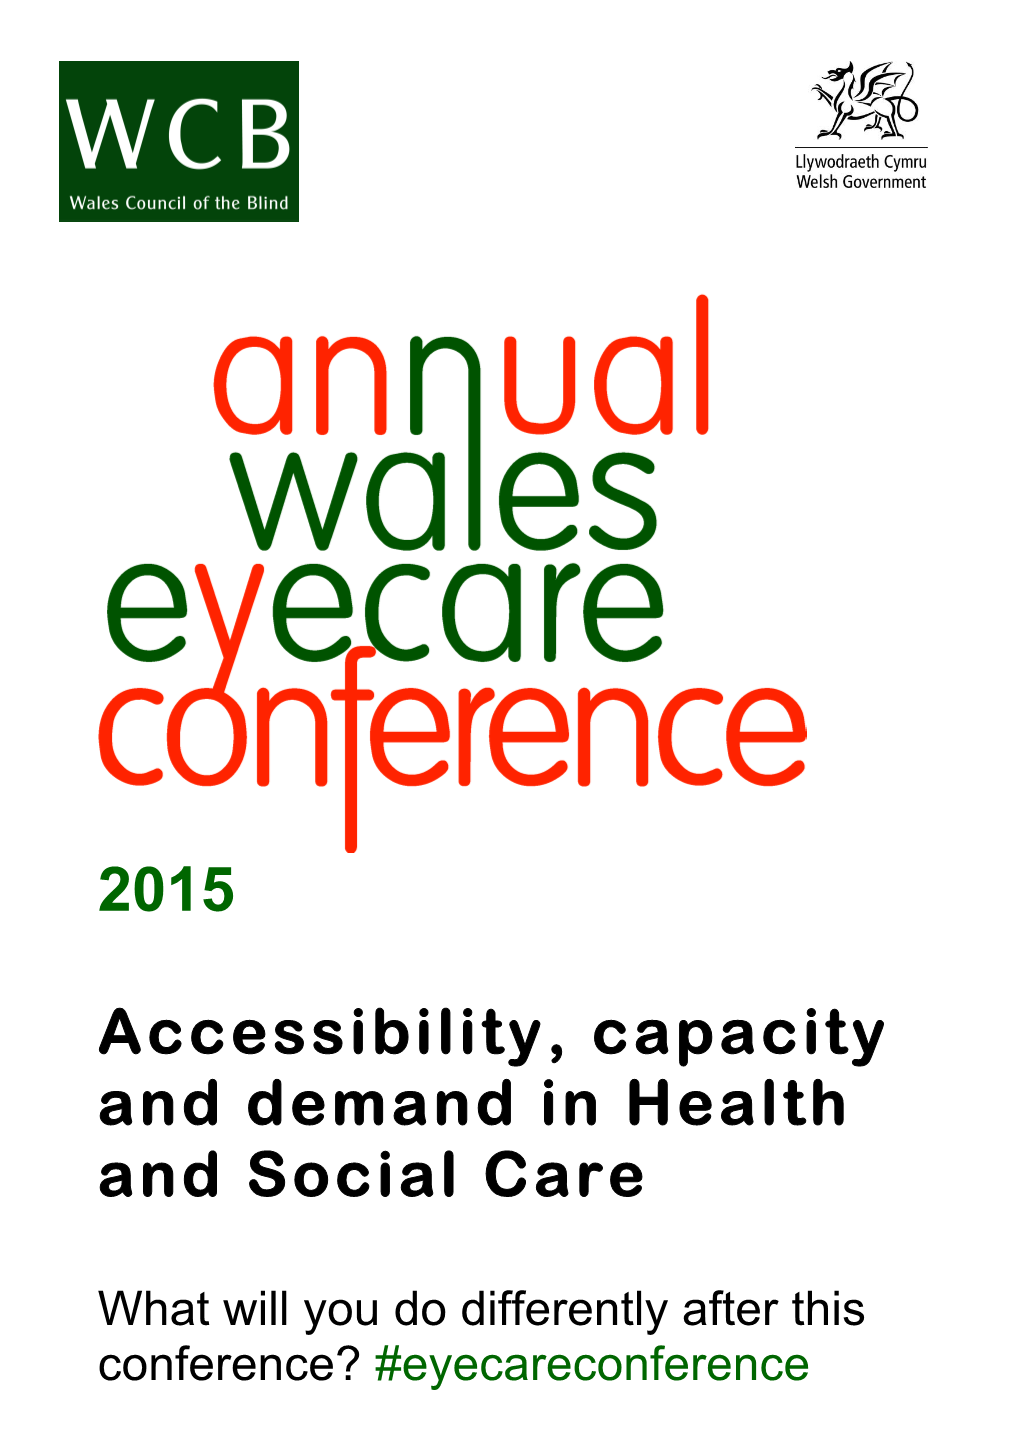 2015 Accessibility, Capacity and Demand in Health and Social Care